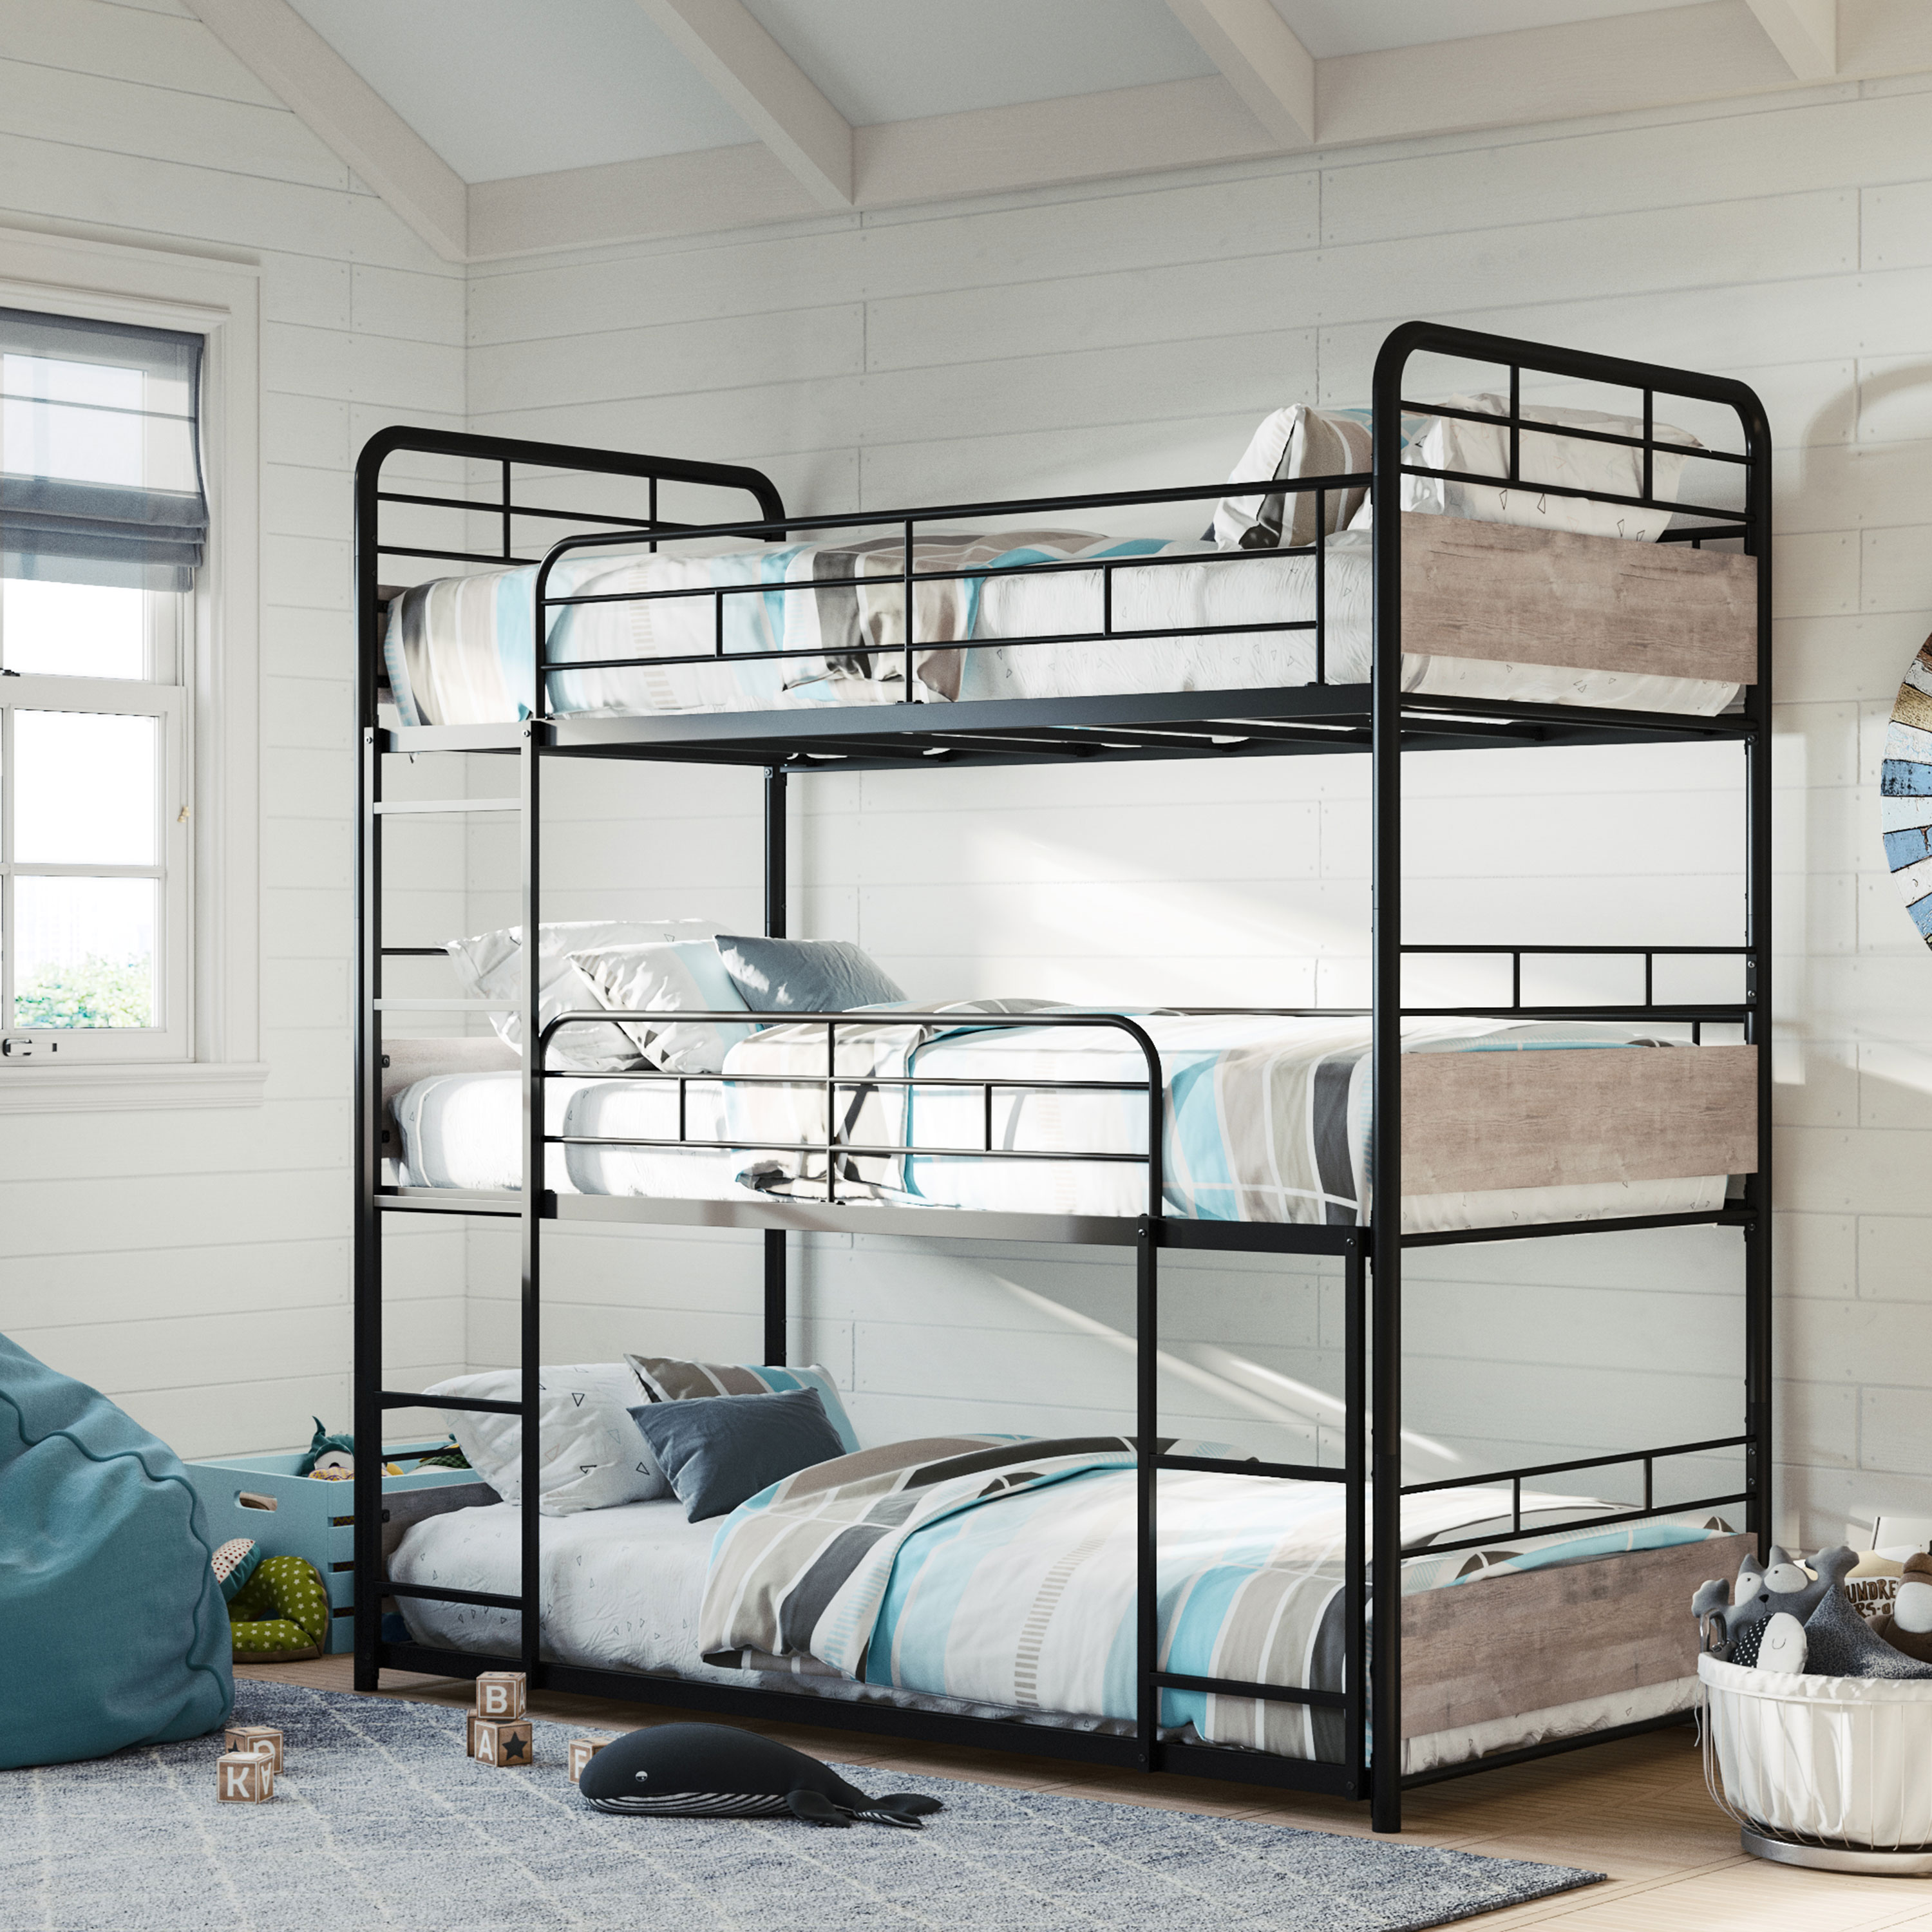 Better Homes & Gardens Anniston Convertible Black Metal Triple Twin Bunk Bed, Gray Wood Accents - image 7 of 26